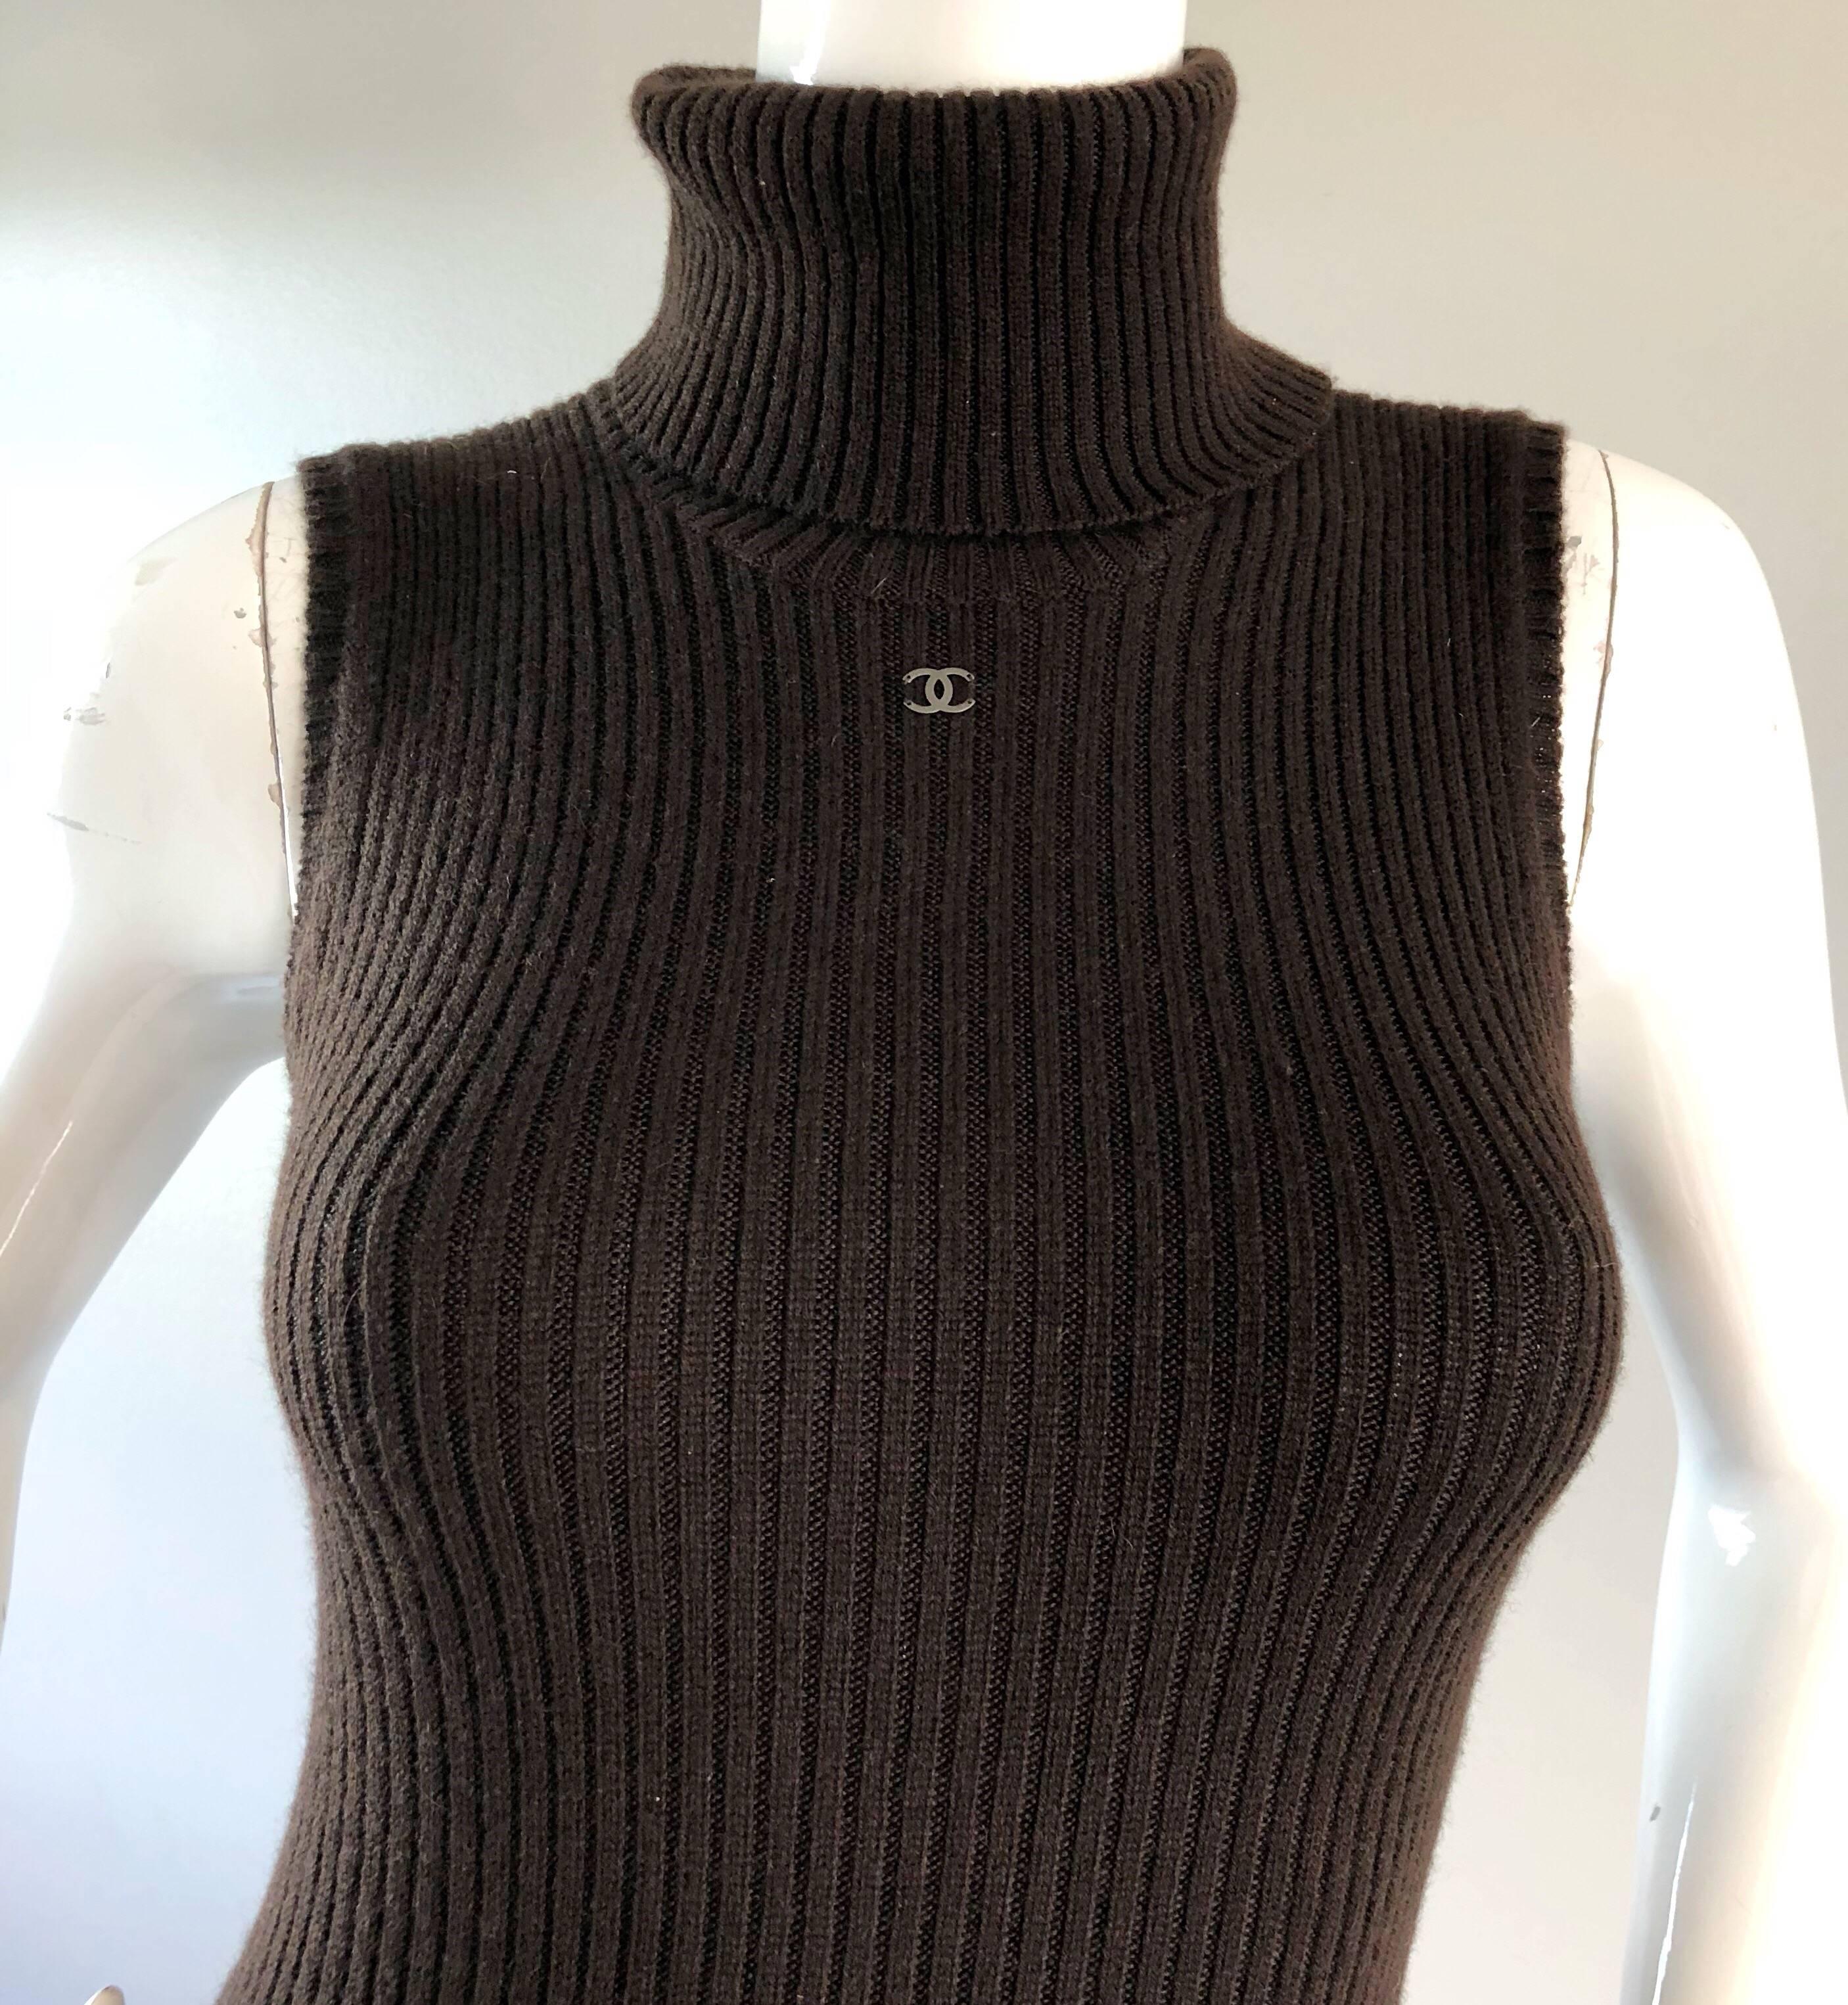 Chic vintage CHANEL 99A, by KARL LAGERFELD, cashmere (55%) and rayon (45%) blend turtleneck ribbed espresso brown maxi dress! Features extremely soft and comfortable fabric that stretches to fit. Gunmetal silver CC logo above center bust. Perfect to